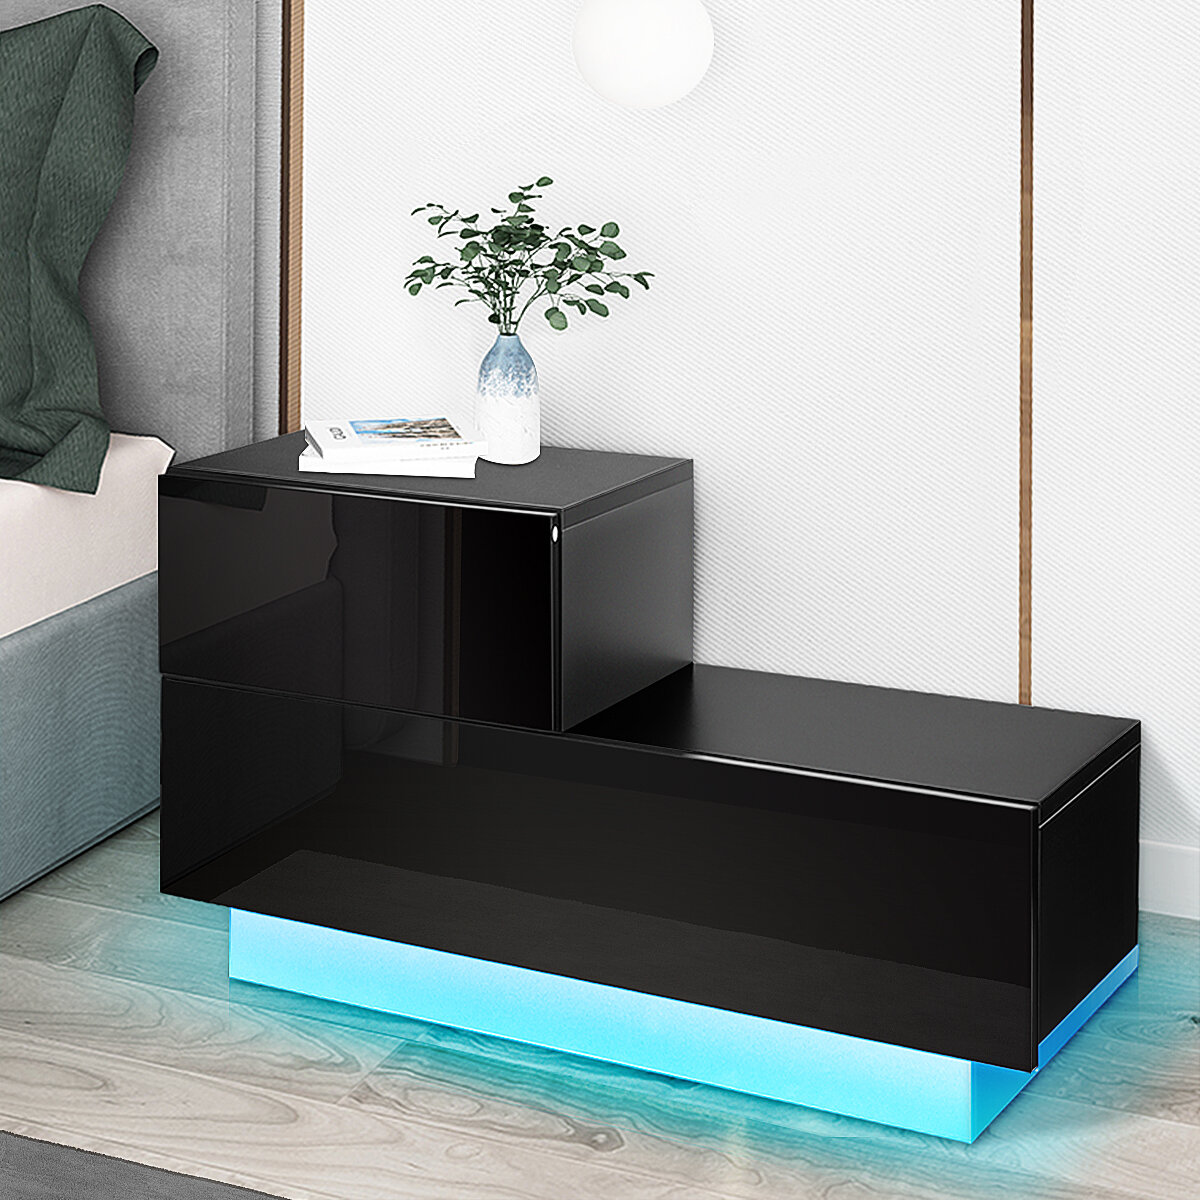 Woodyhome Nightstand with Multi-colour RGB LED Backlight Modern High Gloss Bedside Table with 2 Drawers for Home and Off